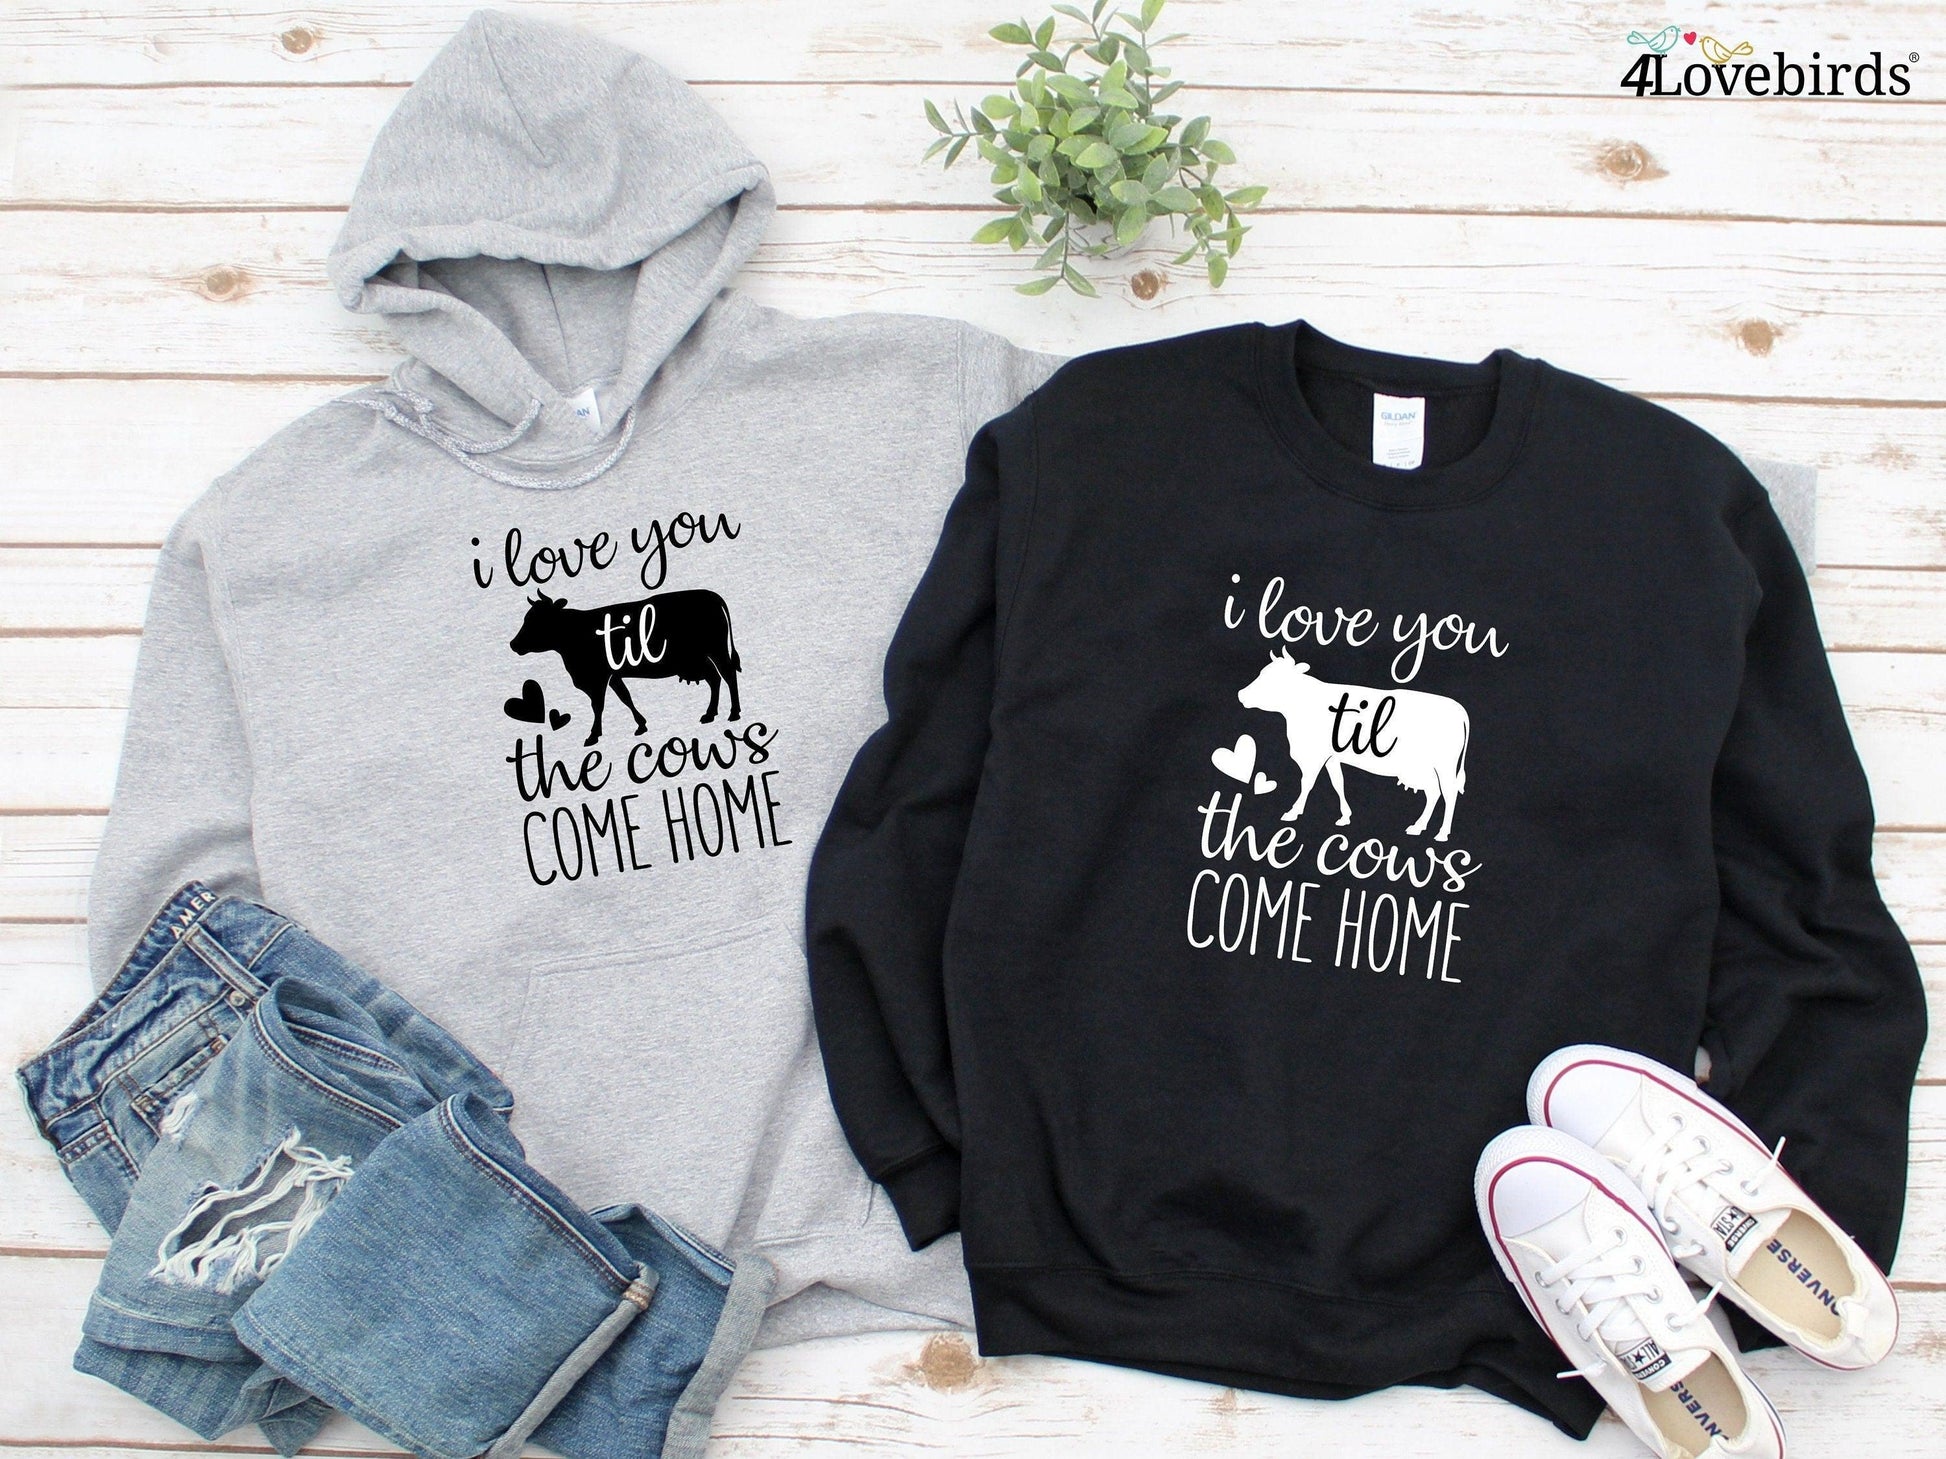 I love you til the cows come home Hoodie, Funny matching T-shirt, Gift for Couple, Valentine Sweatshirt, Boyfriend and Girlfriend Longsleeve - 4Lovebirds